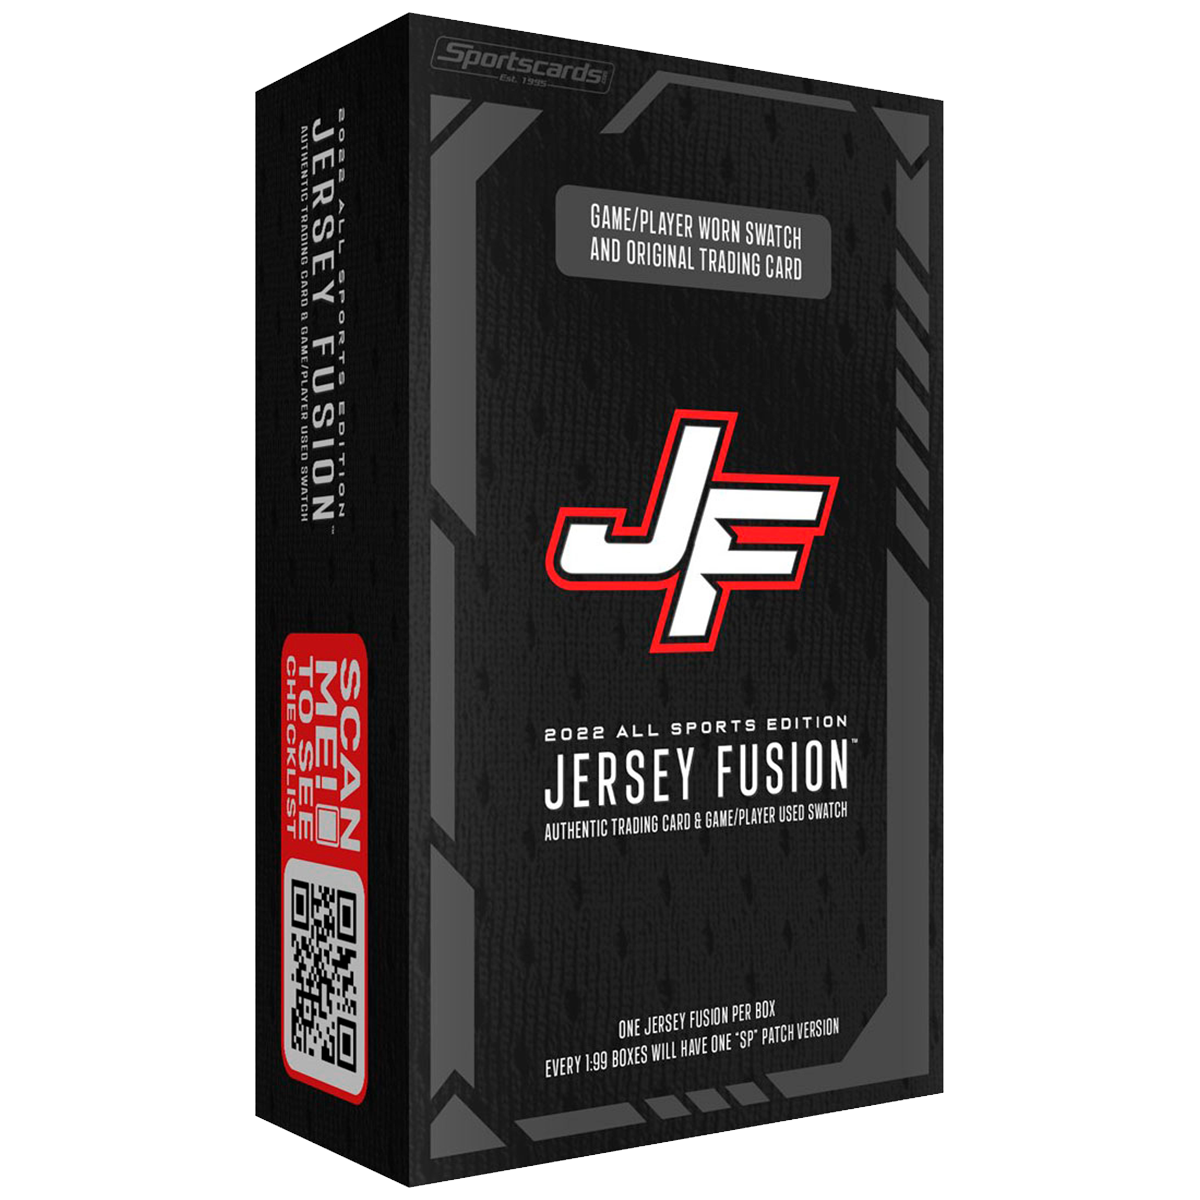 Jersey Fusion All Sports Series 2 Case - (100) Sealed Boxes Per